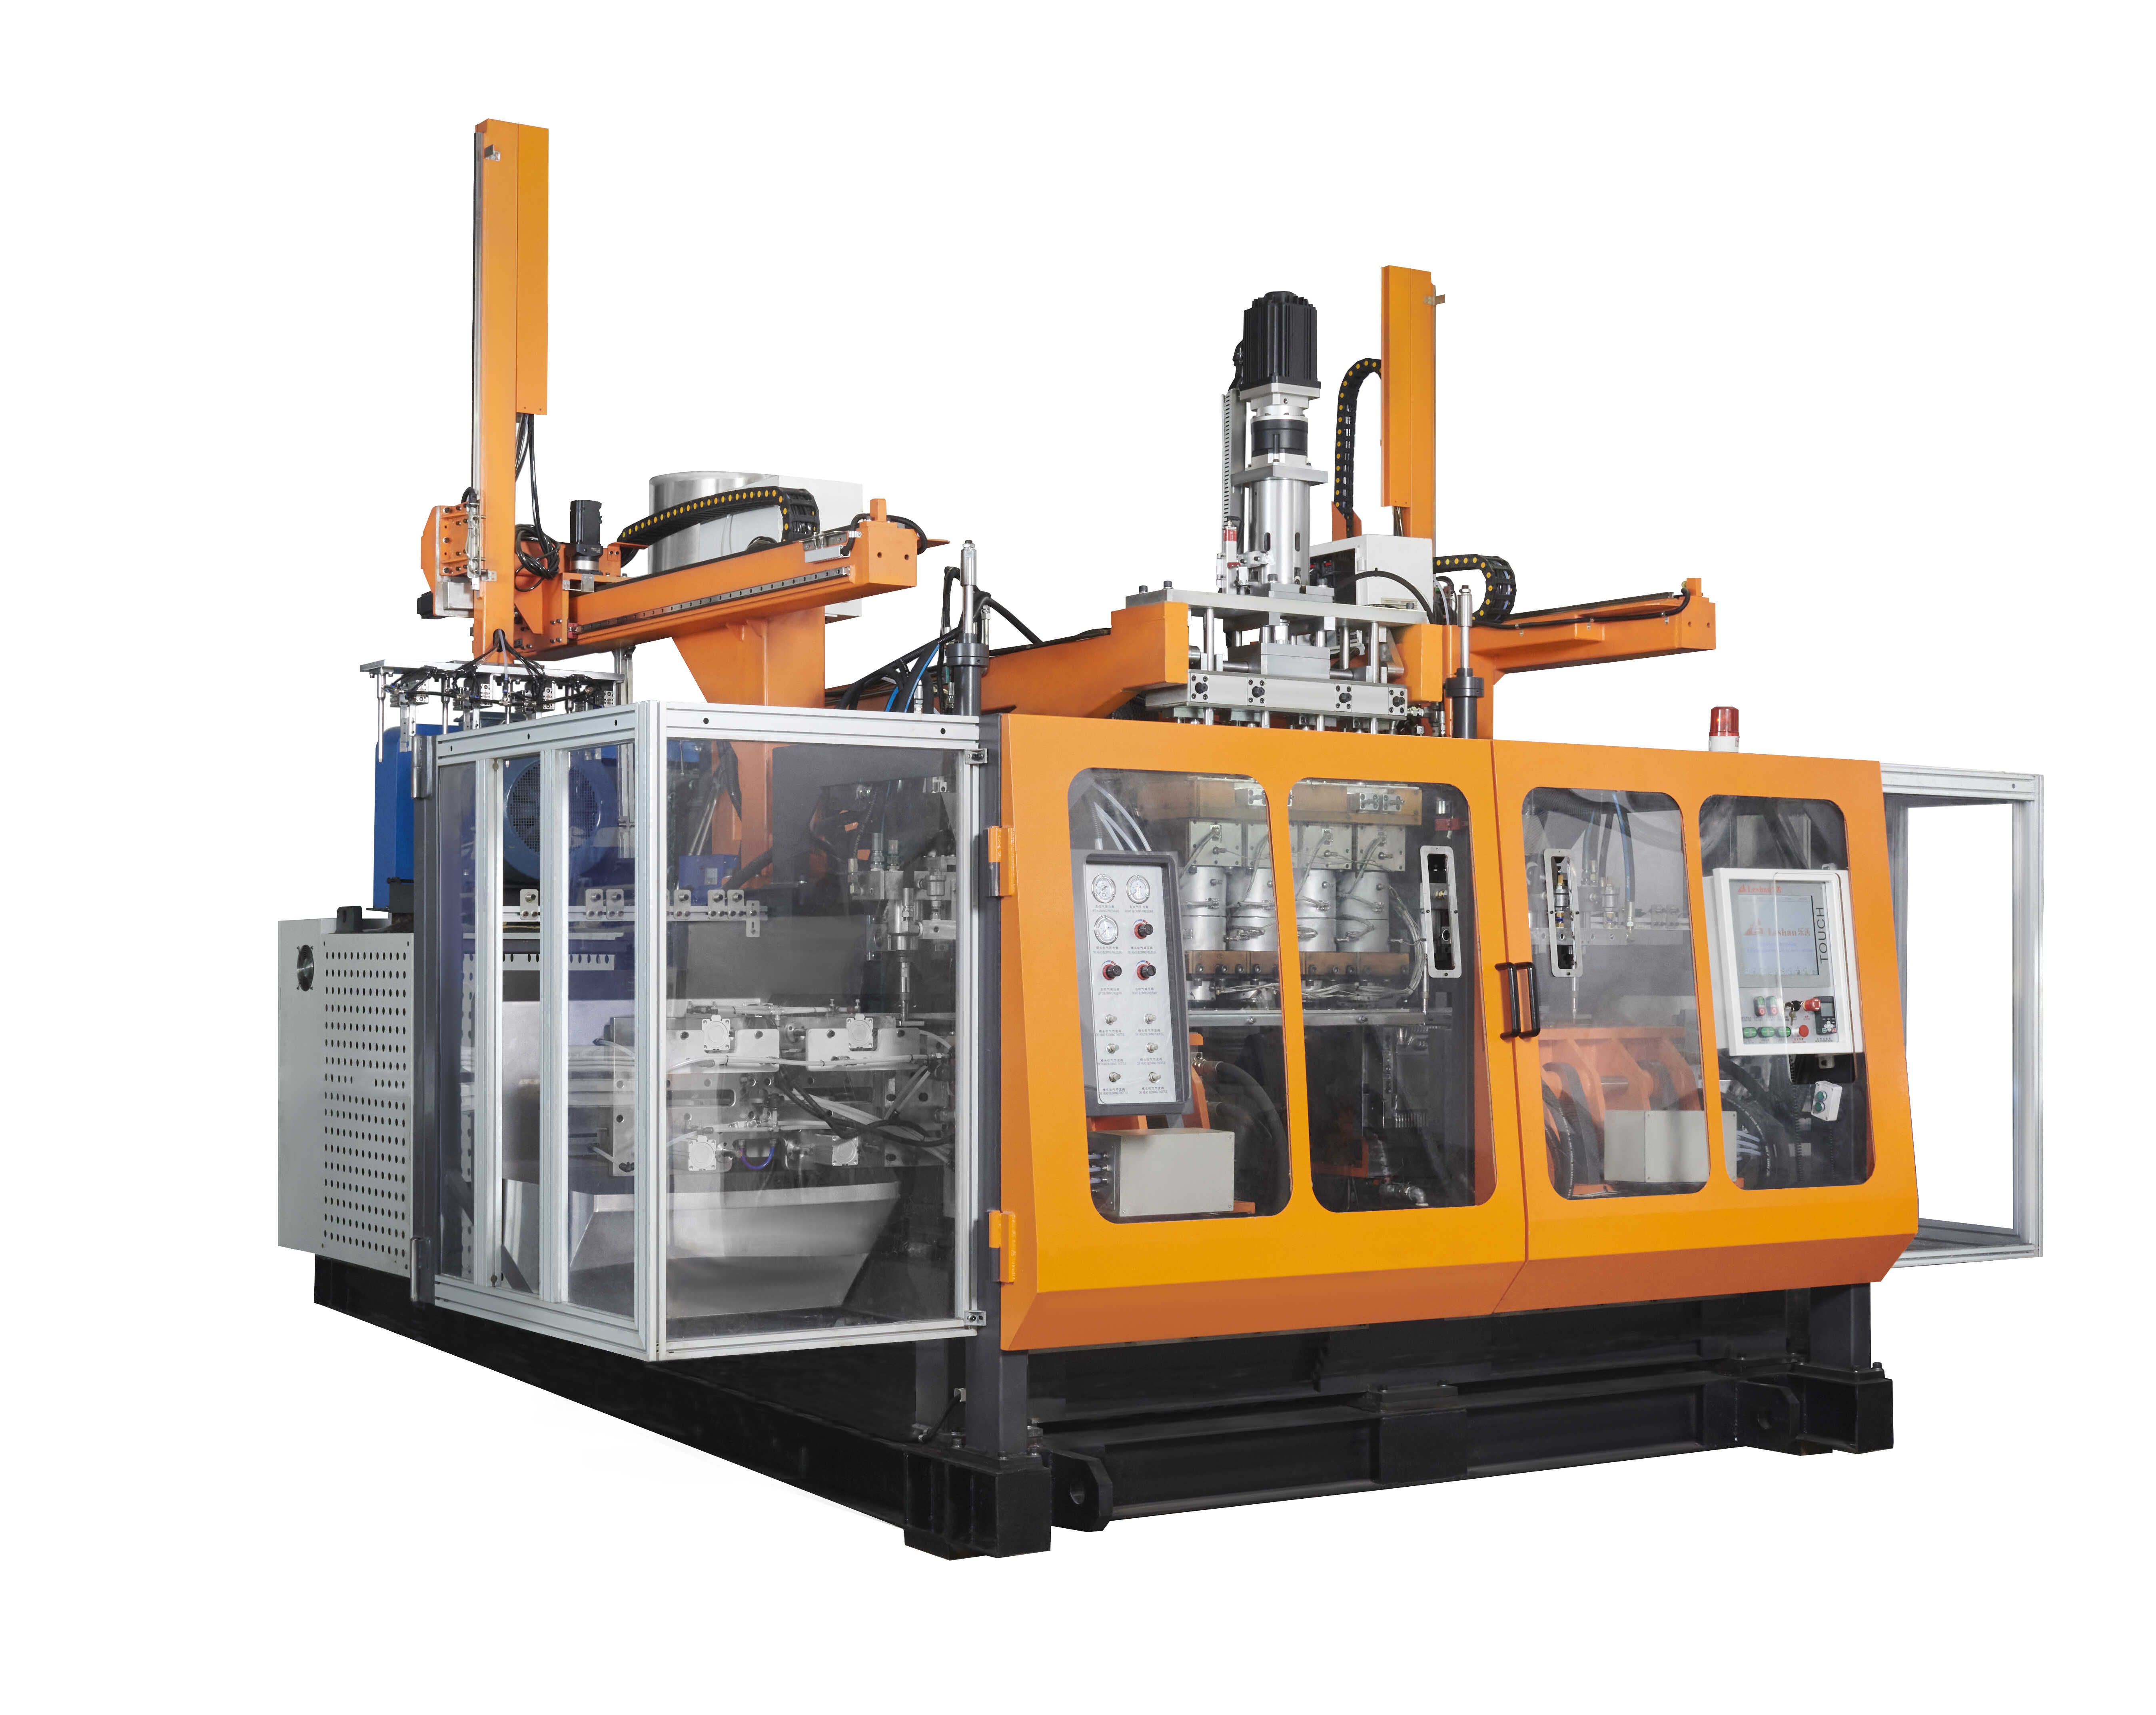 What is the cost composition of automatic blow molding machine equipment?